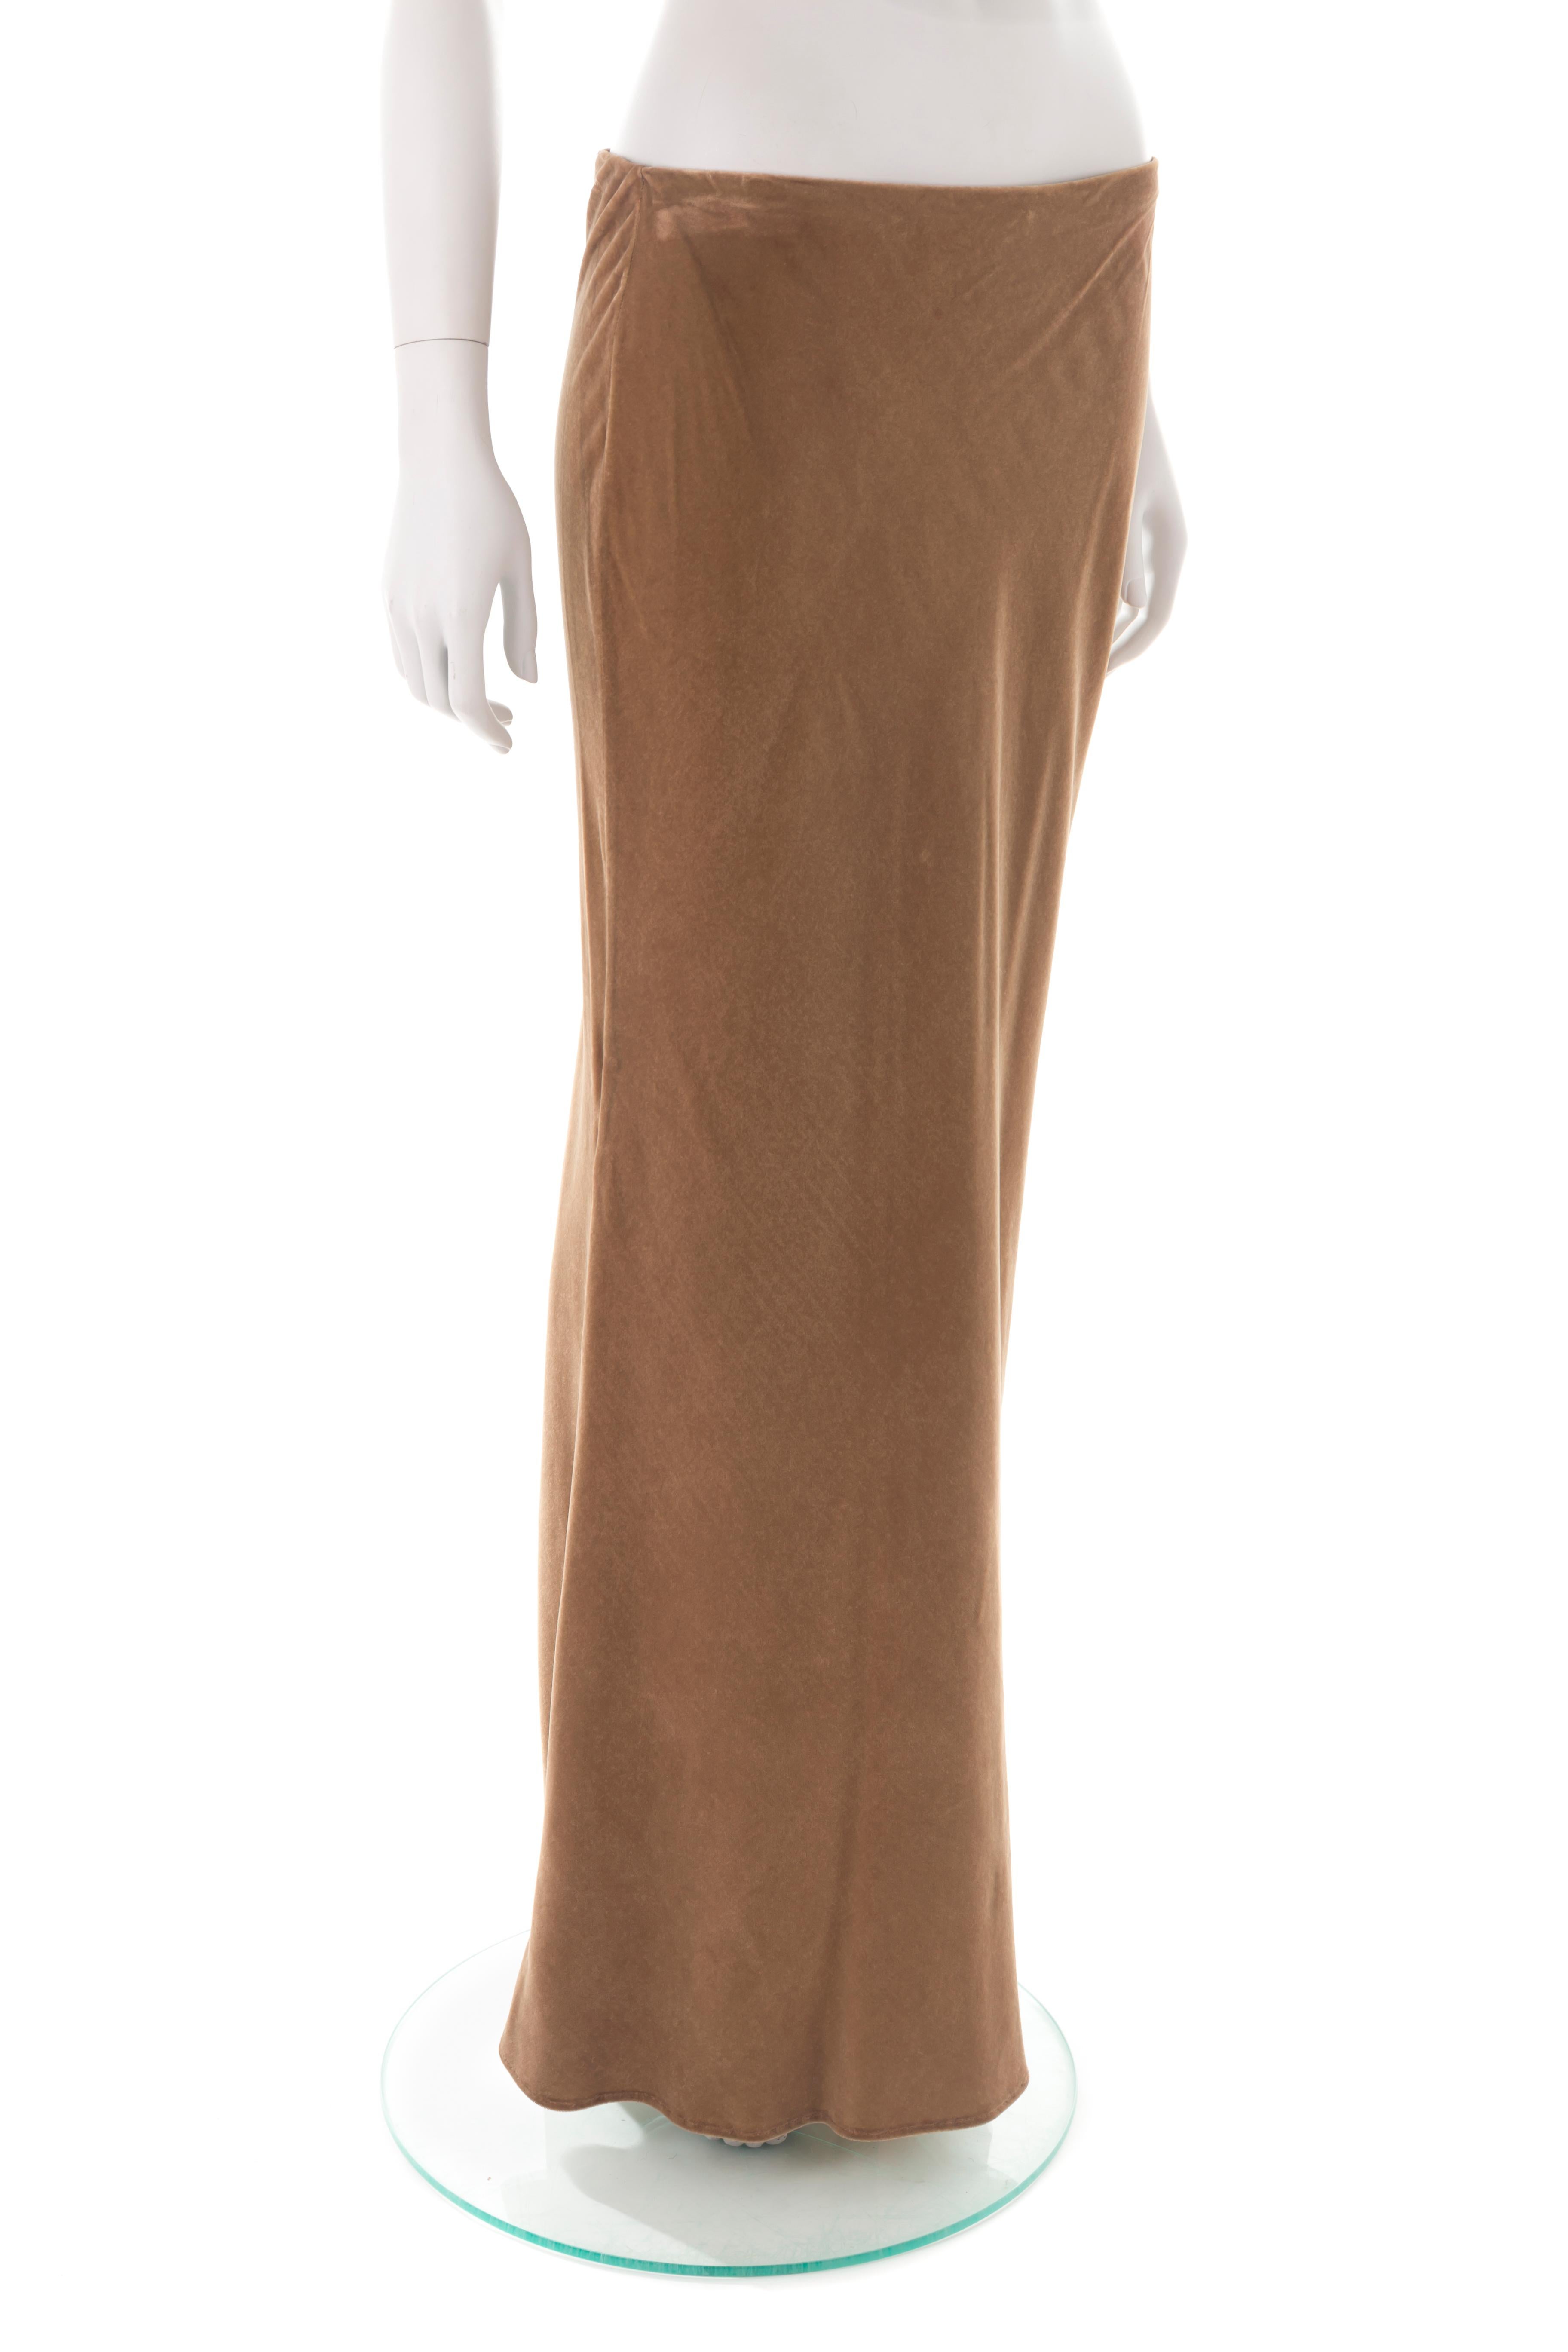 - Roberto Cavalli Class by Roberto Cavalli
- Sold by Gold Palms Vintage
- Early 2000s
- Brown velvet fabric
- Figure-hugging fit
- Low-waist
- Size 44
- Pinch marks on the waistband
